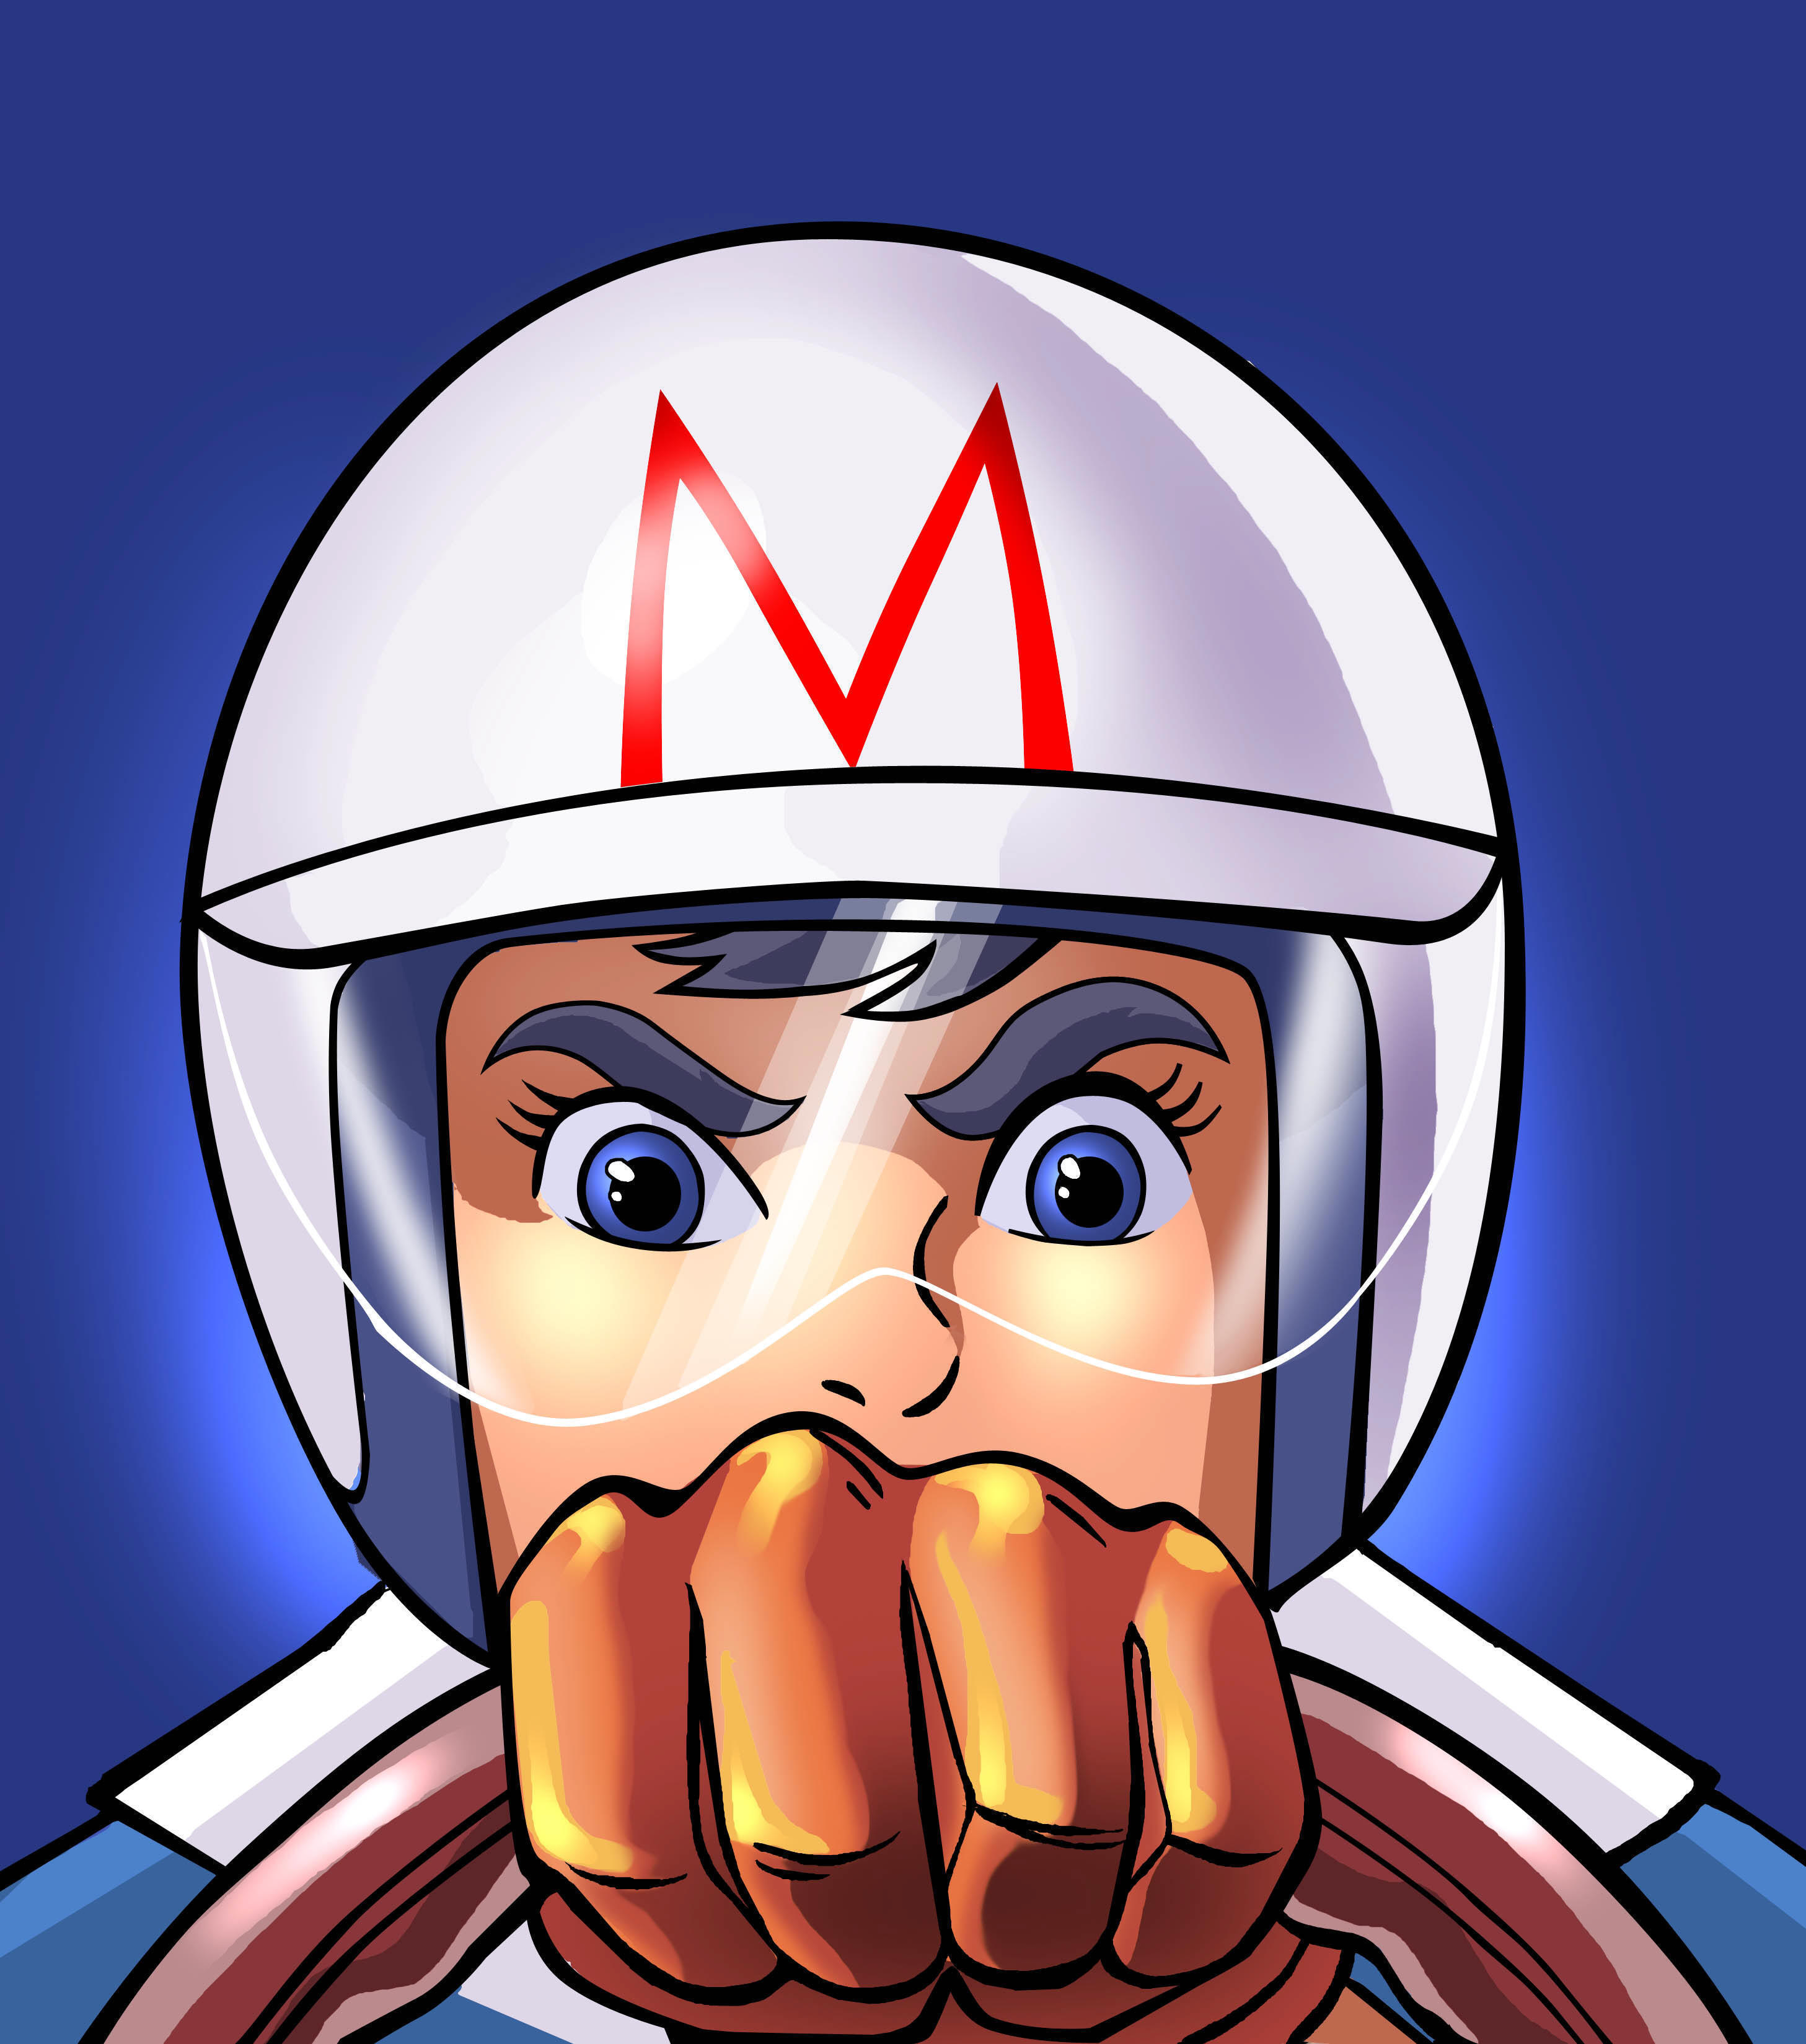 Speed Racer Pics, Anime Collection